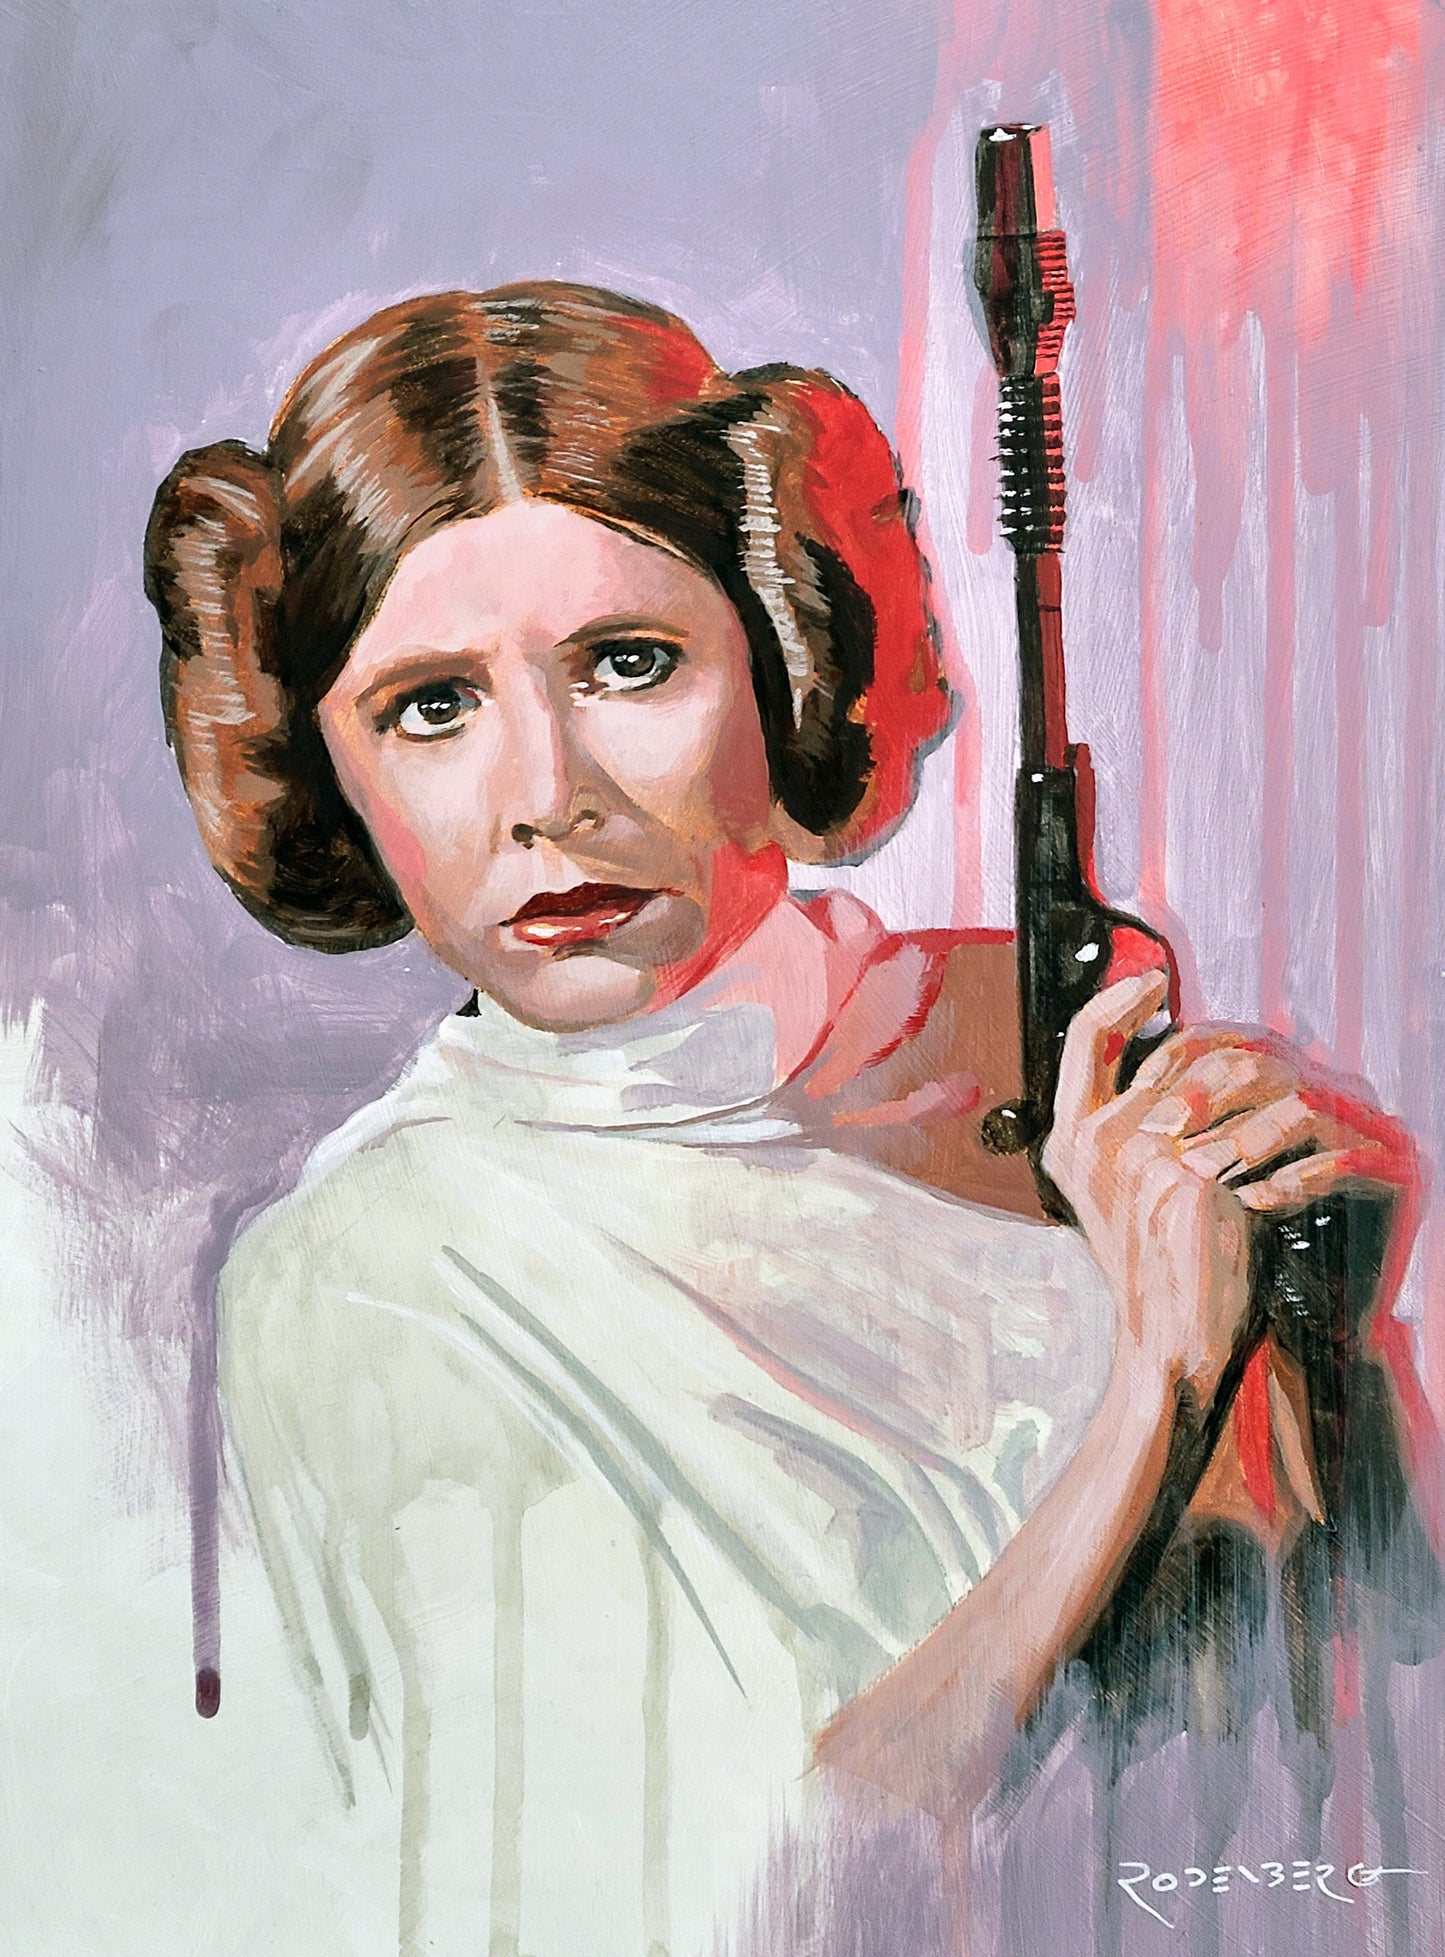 Star Wars Leia painting art by Jeff Rodenberg